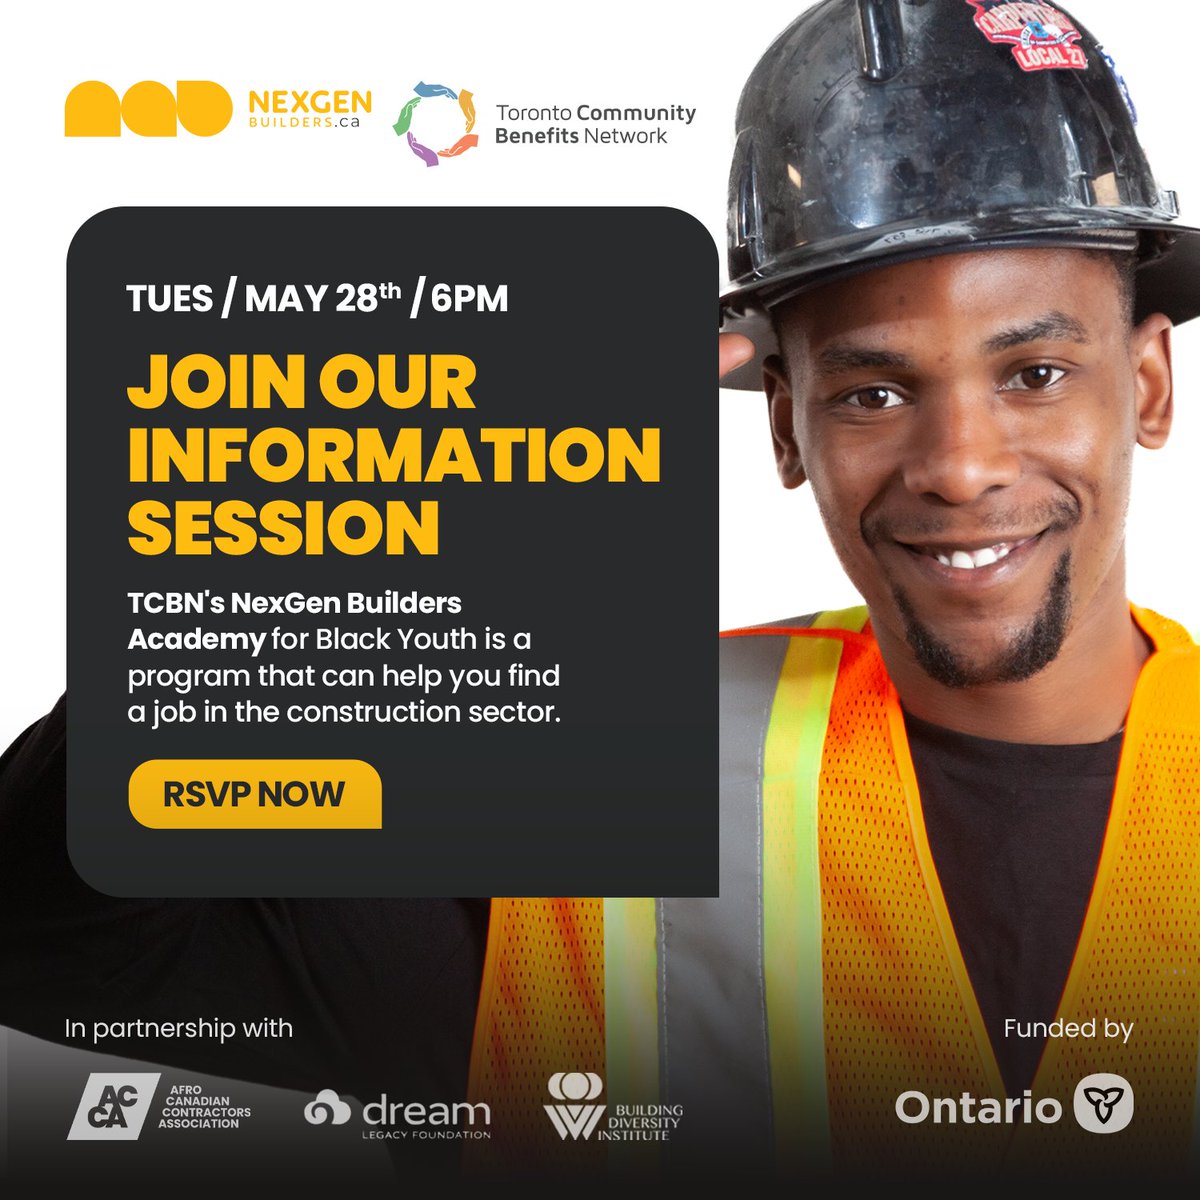 Happening Tomorrow! In partnership with Afro Canadian Contractors Association and @DreamLegacyfdn Join the NexGen Builders Academy for Black Youth info session on May 28 at 6 PM to learn more. Please visit nexgenbuilders.ca/academy_info_s… to RSVP #communitybenefits #constructionjobs